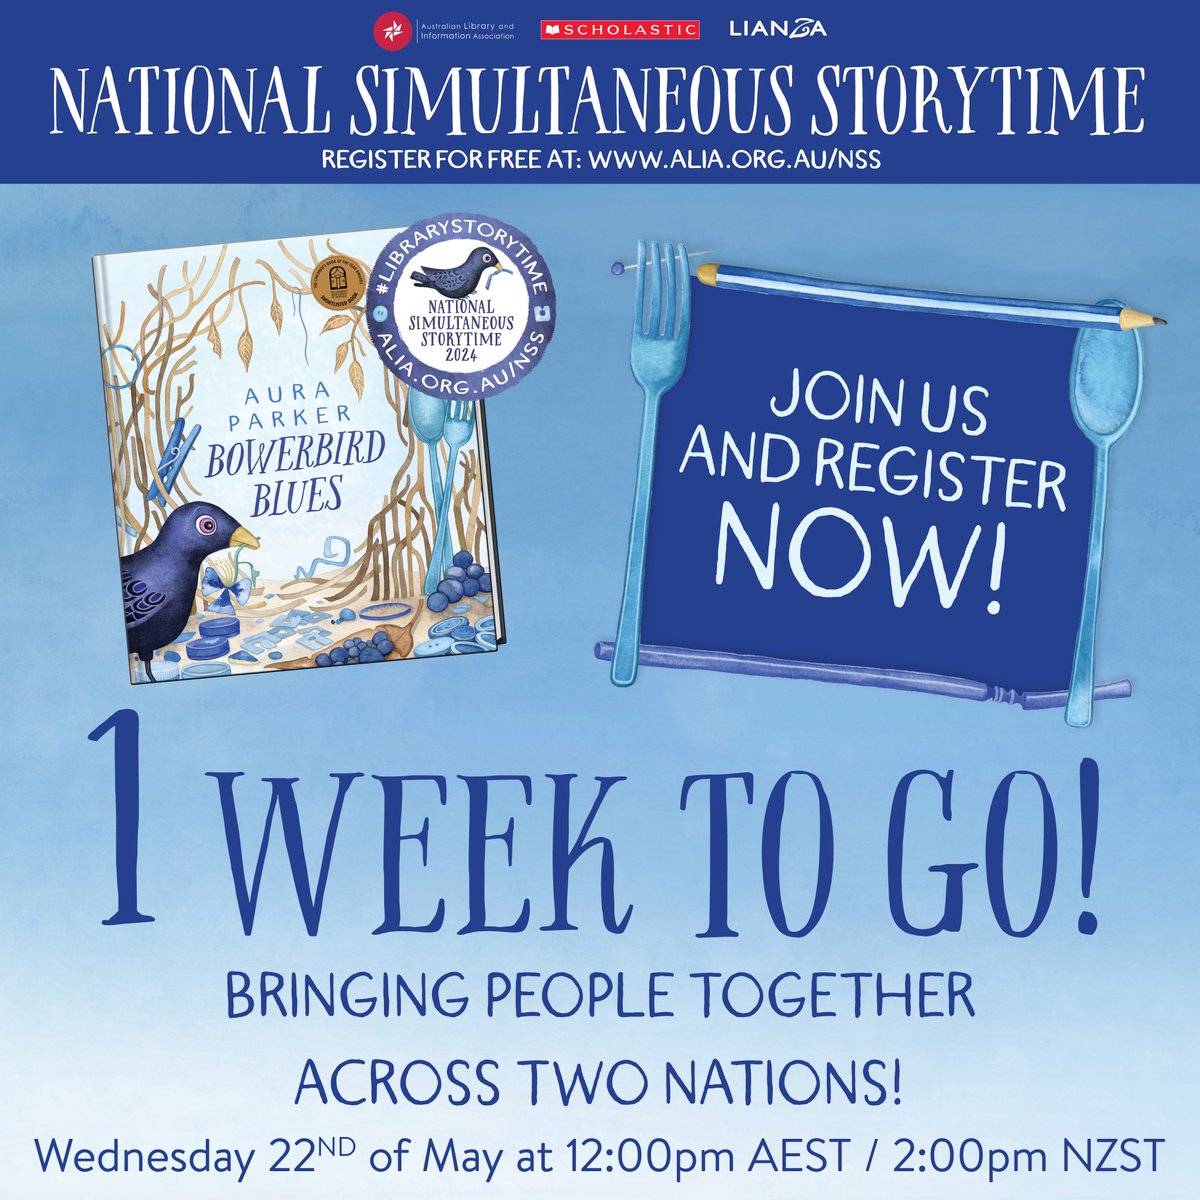 ONE WEEK LEFT! Register to count -> Alia.org.au/NSS @Alianational @LianzaOffice @cityofsydey @AuraParker #Librarystorytime #NSS2024 #millinsofkidsreading